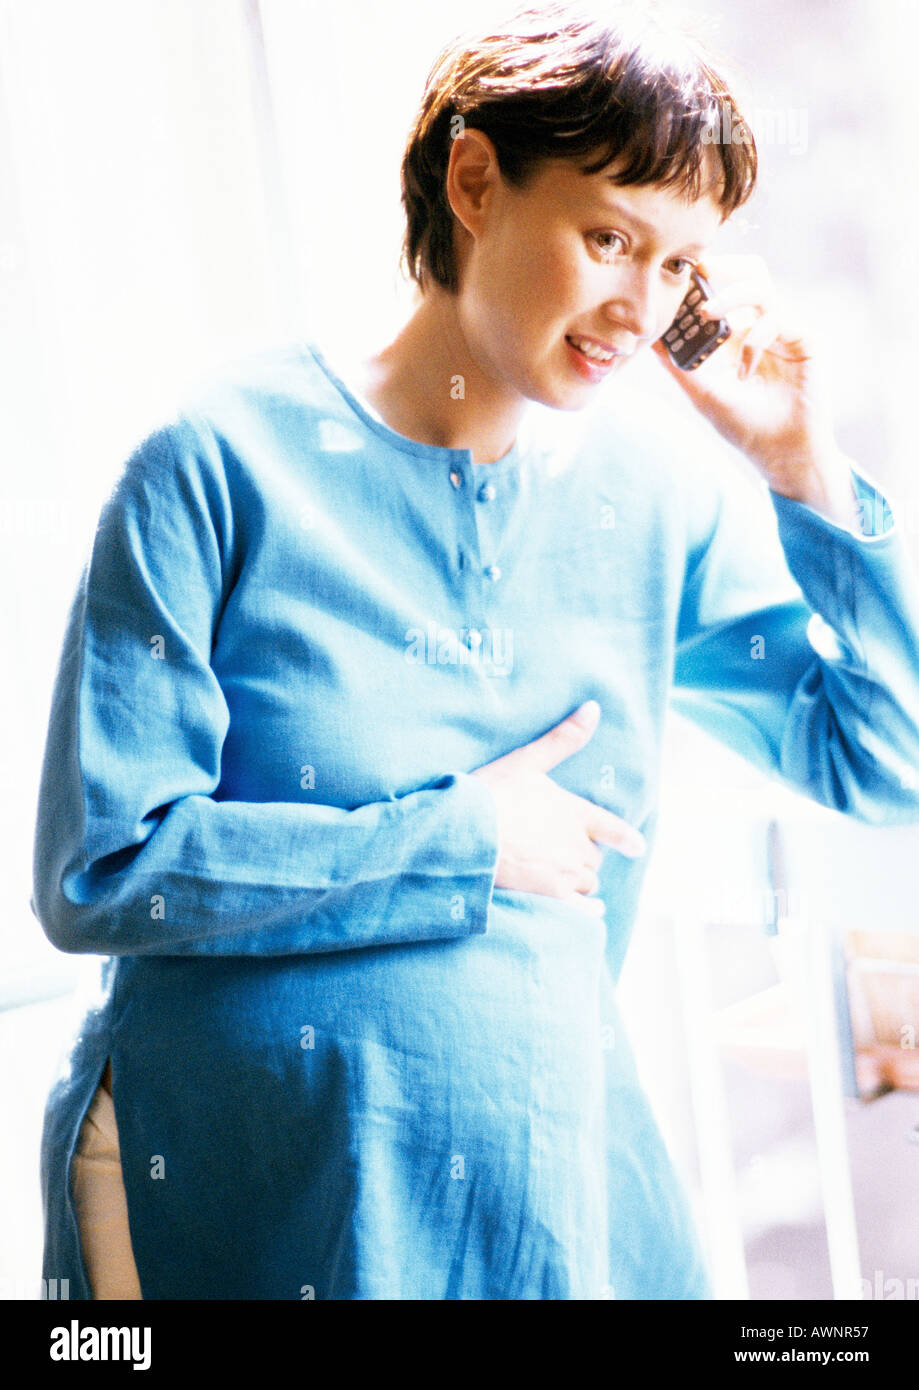 Pregnant woman using cell phone, portrait Stock Photo